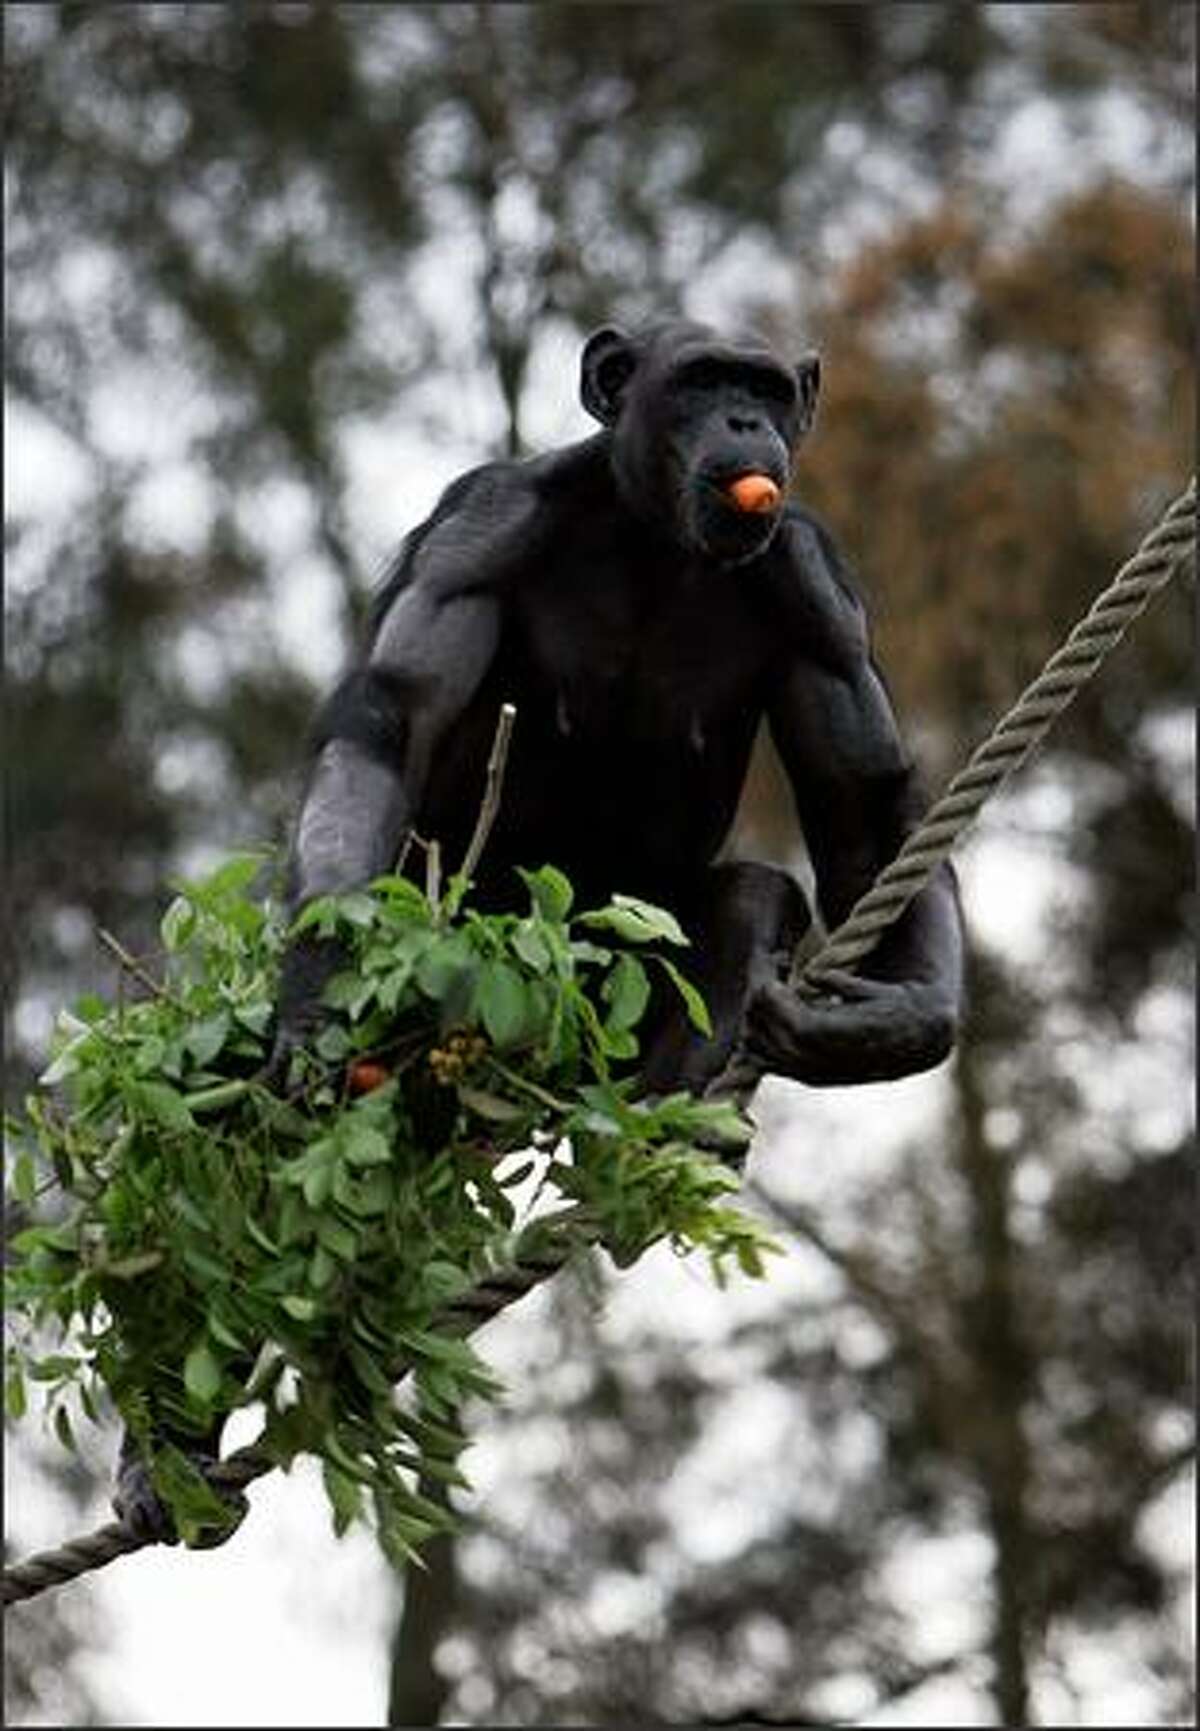 A Chimpanzee climbs a rope after Dr Jane Goodall spoke at Taronga Zoo on in Sydney, Australia. Goodall, the world renowned primatologist, has acknowledged the breeding and work research carried out by the Chimpanzee Group at Taronga Zoo over recent years.